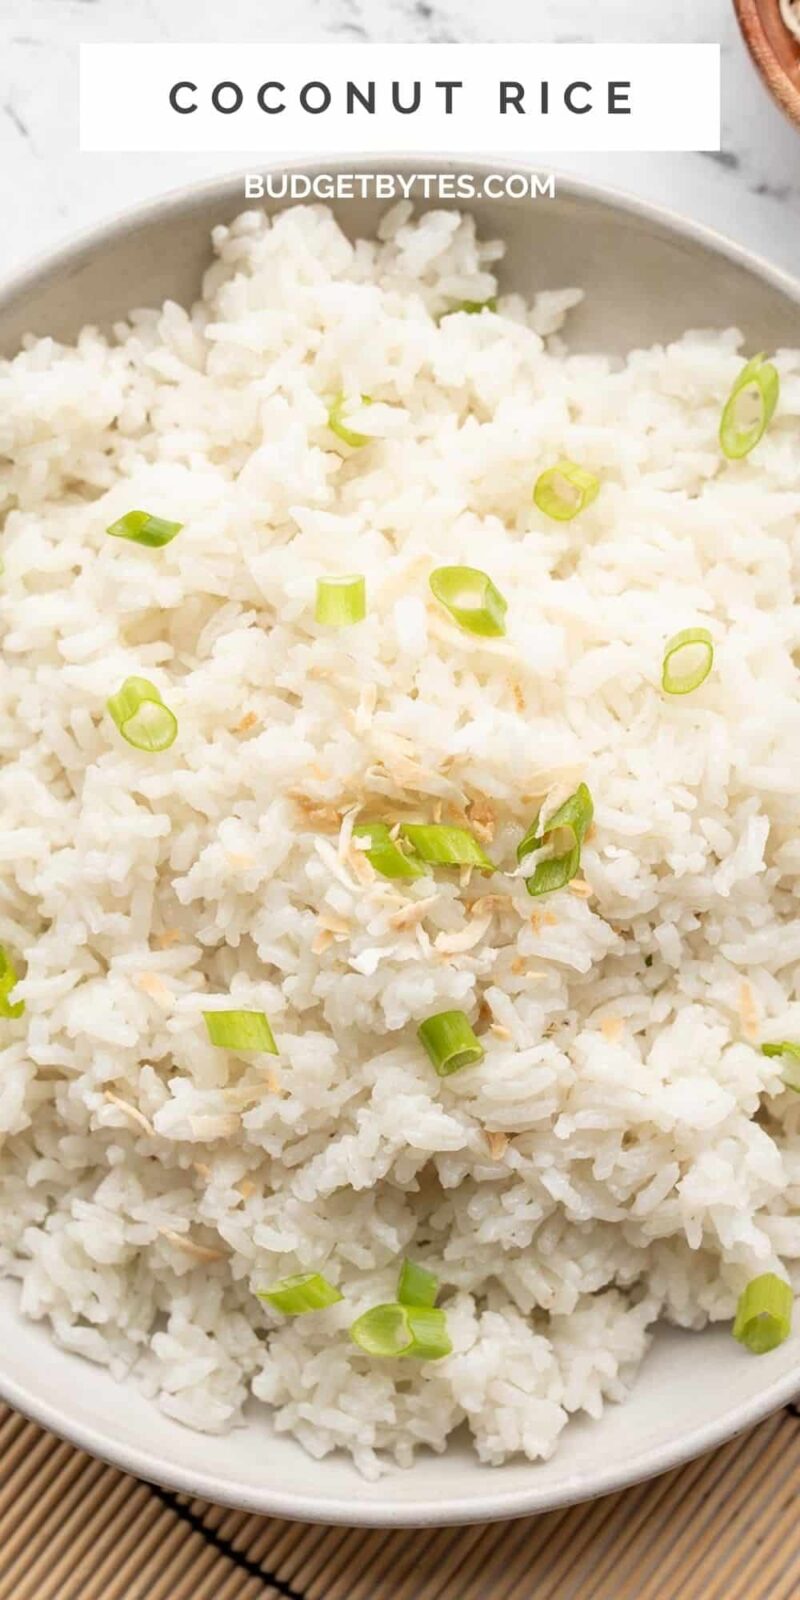 Overhead view of a plate full of coconut rice, title text at the top.